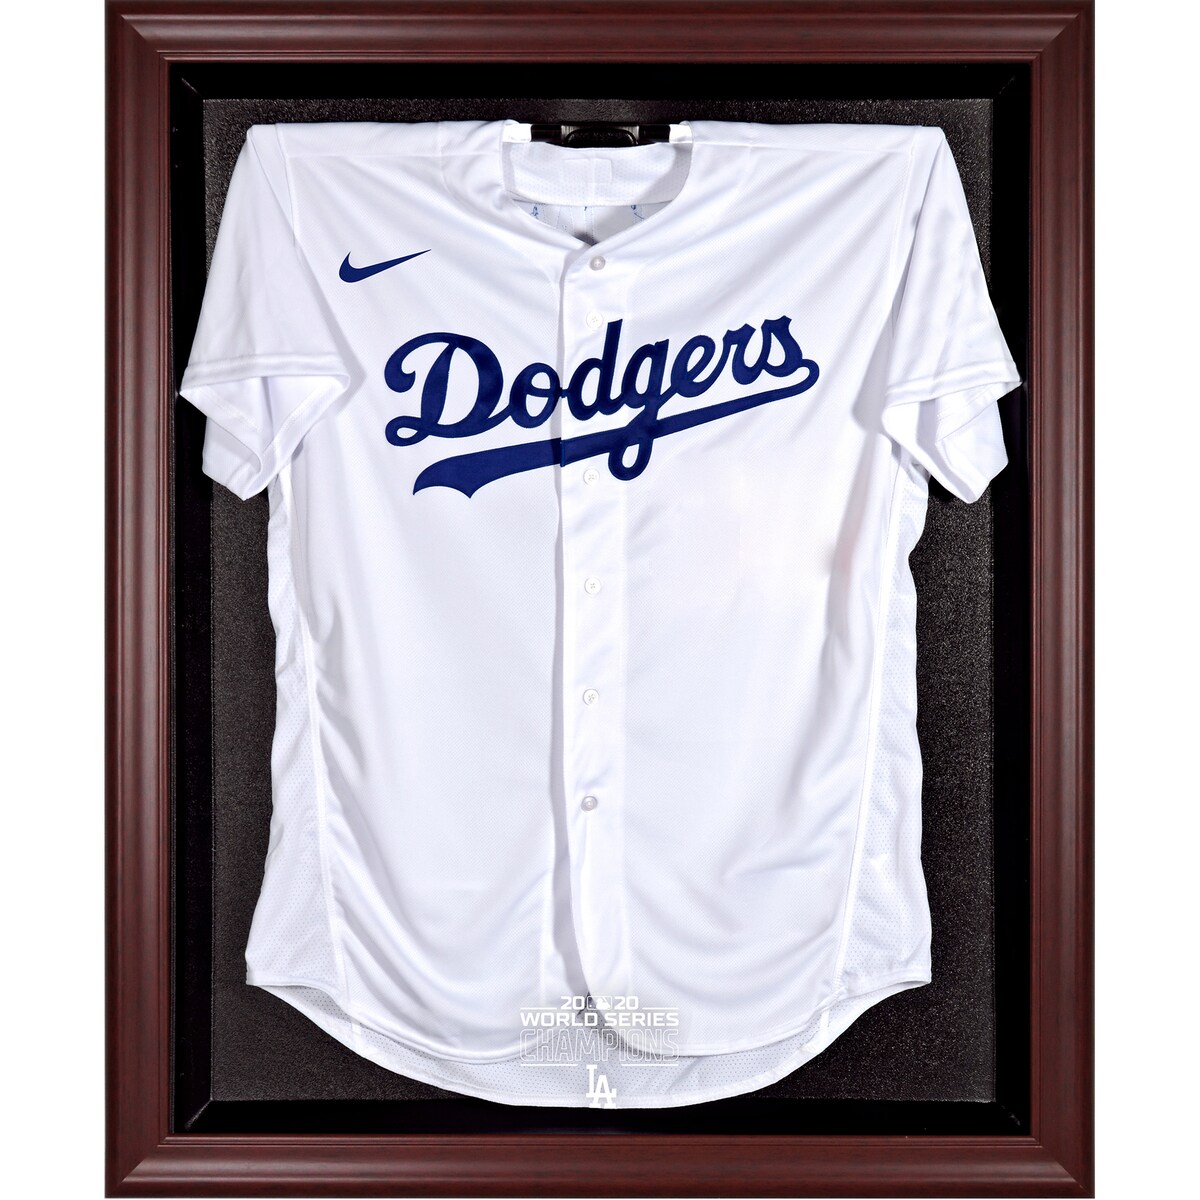 Celebrate the Los Angeles Dodgers as the 2020 World Series Champions with this collectible display case. The mahogany framed logo jersey display case opens on hinges and is easily wall mounted. It comes with a 24'' clear acrylic rod to display a collectible jersey and is constructed with a durable, high-strength injection mold backing. It comes encased by a wood frame with engraved team logo. It is officially licensed by Major League Baseball. The inner dimensions of the case are 38'' x 29 1/2'' x 3'' with the outer measurements of 42'' x 34 1/2'' x 3 1/2''. Memorabilia is sold separately.Memorabilia sold separatelyBrand: Fanatics AuthenticOfficially licensed